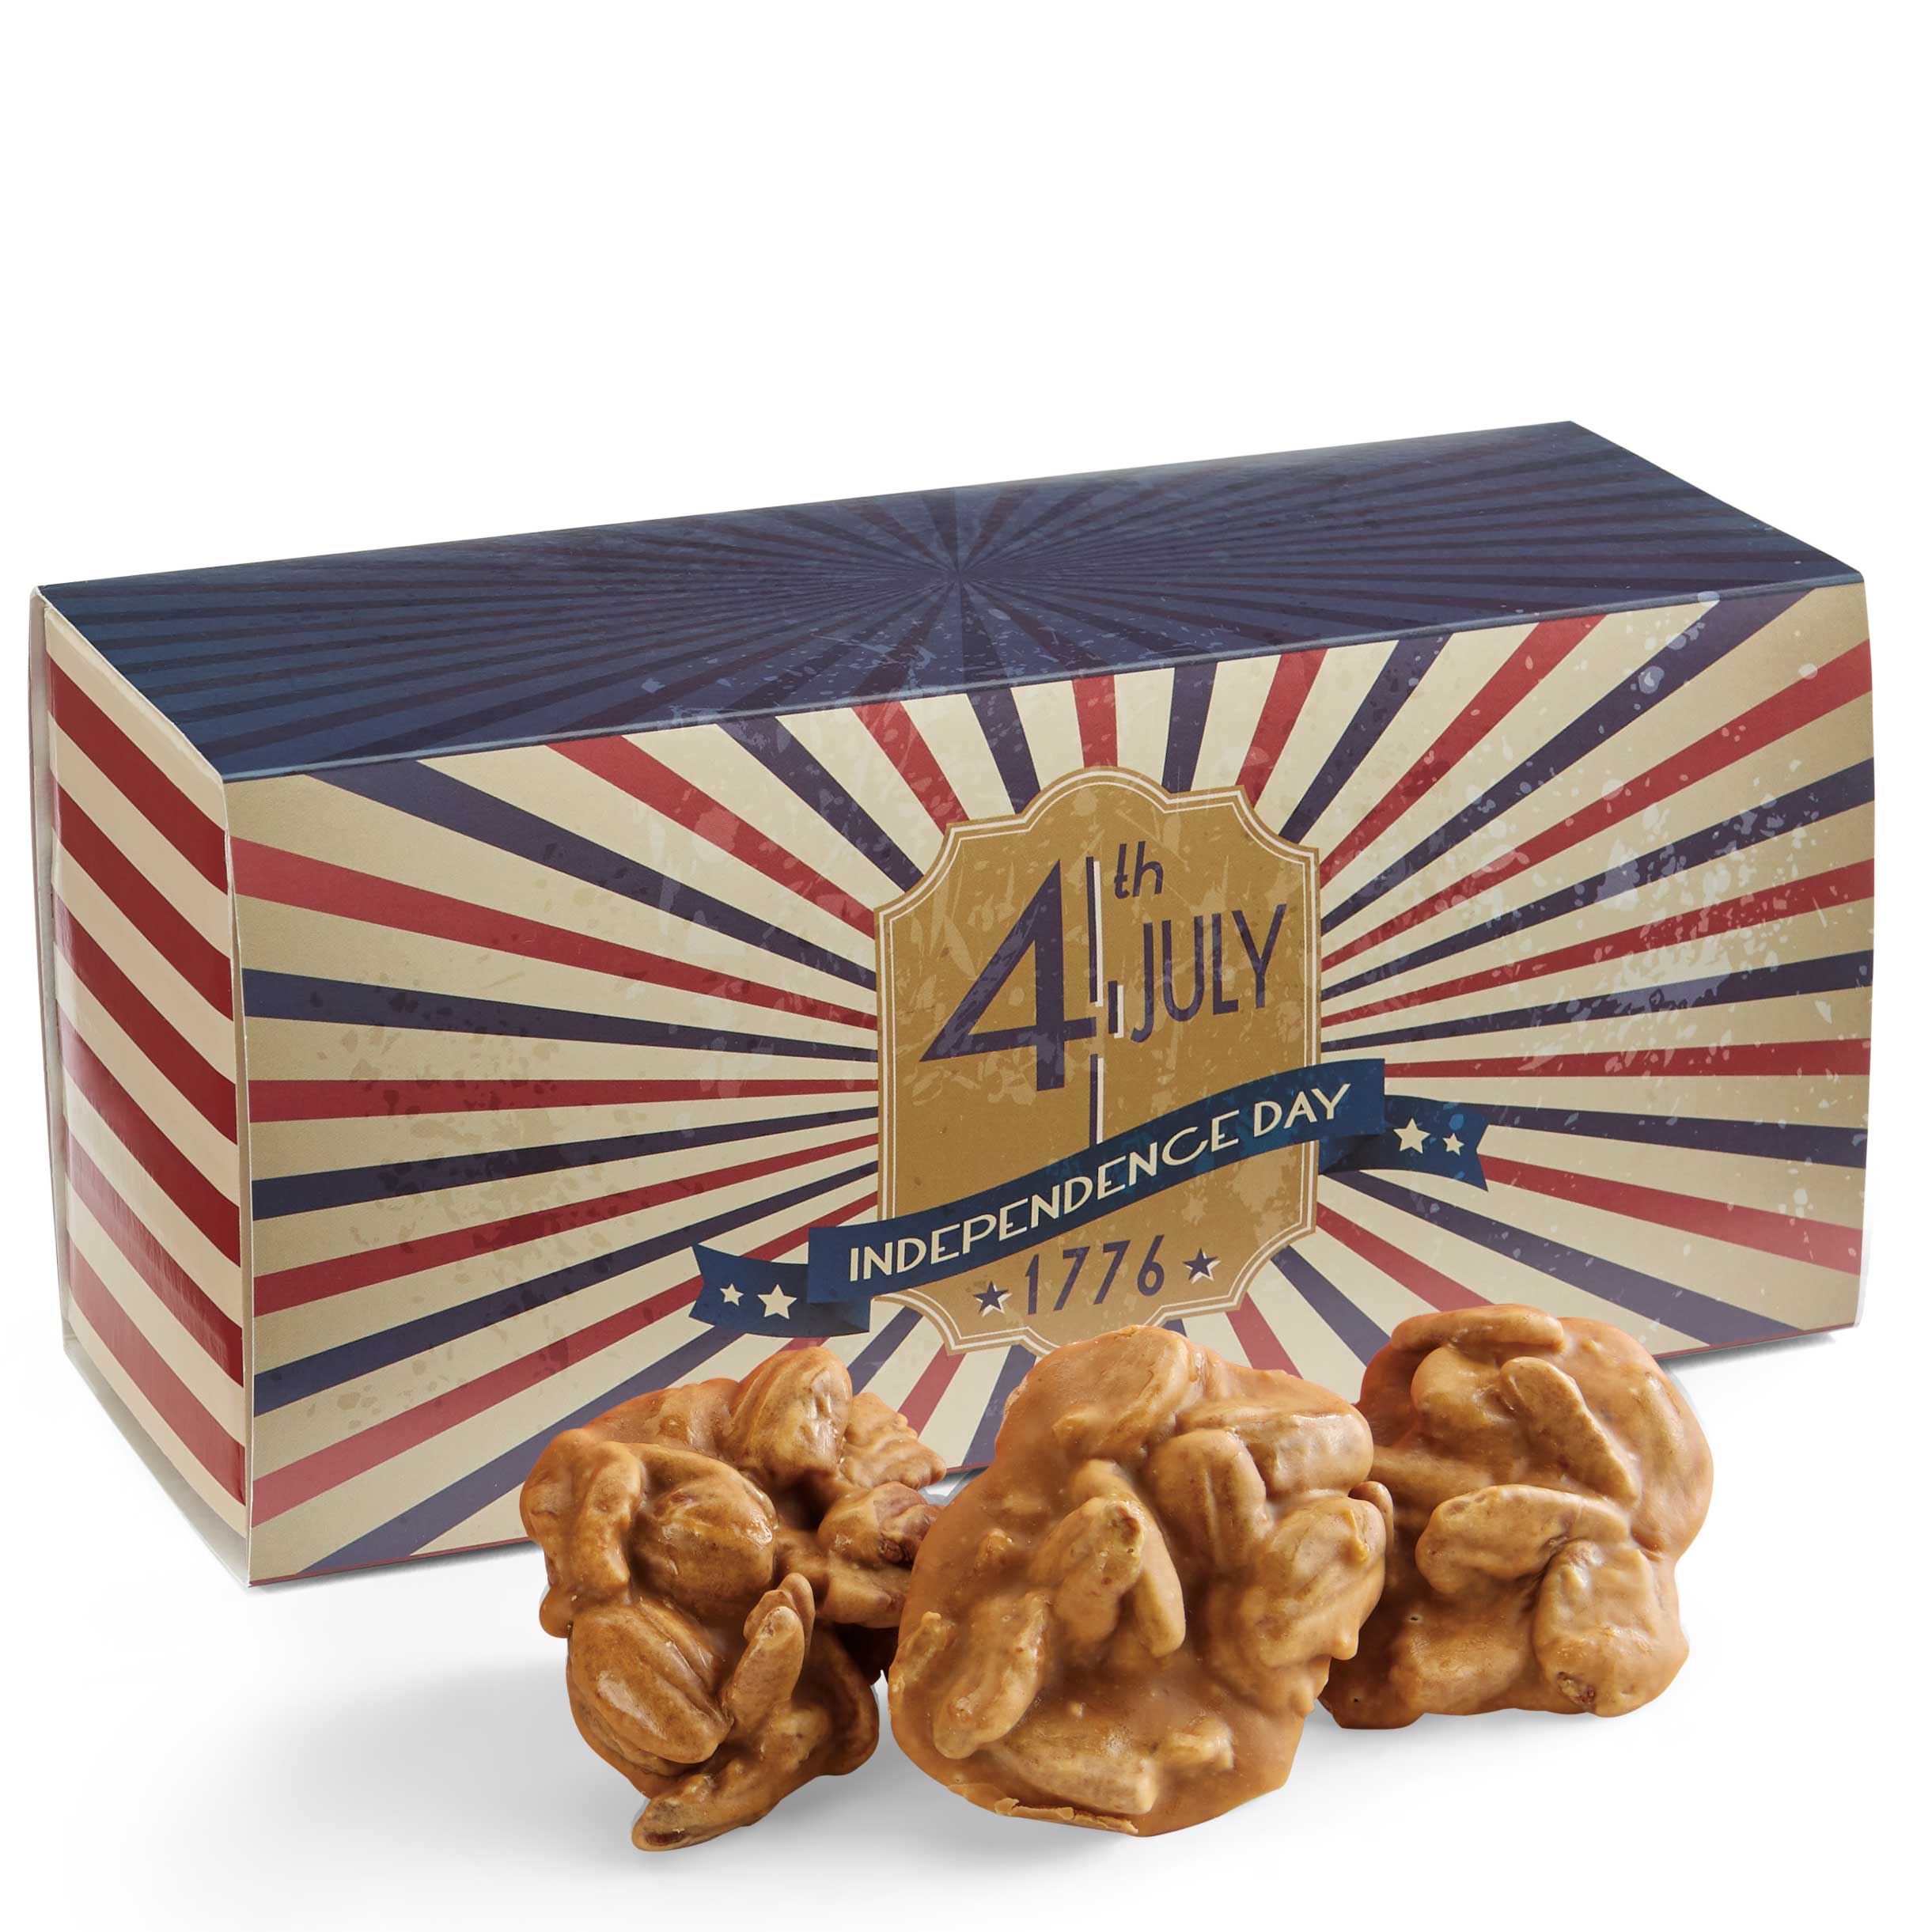 12 Piece Original Pralines in the 4th of July Gift Box